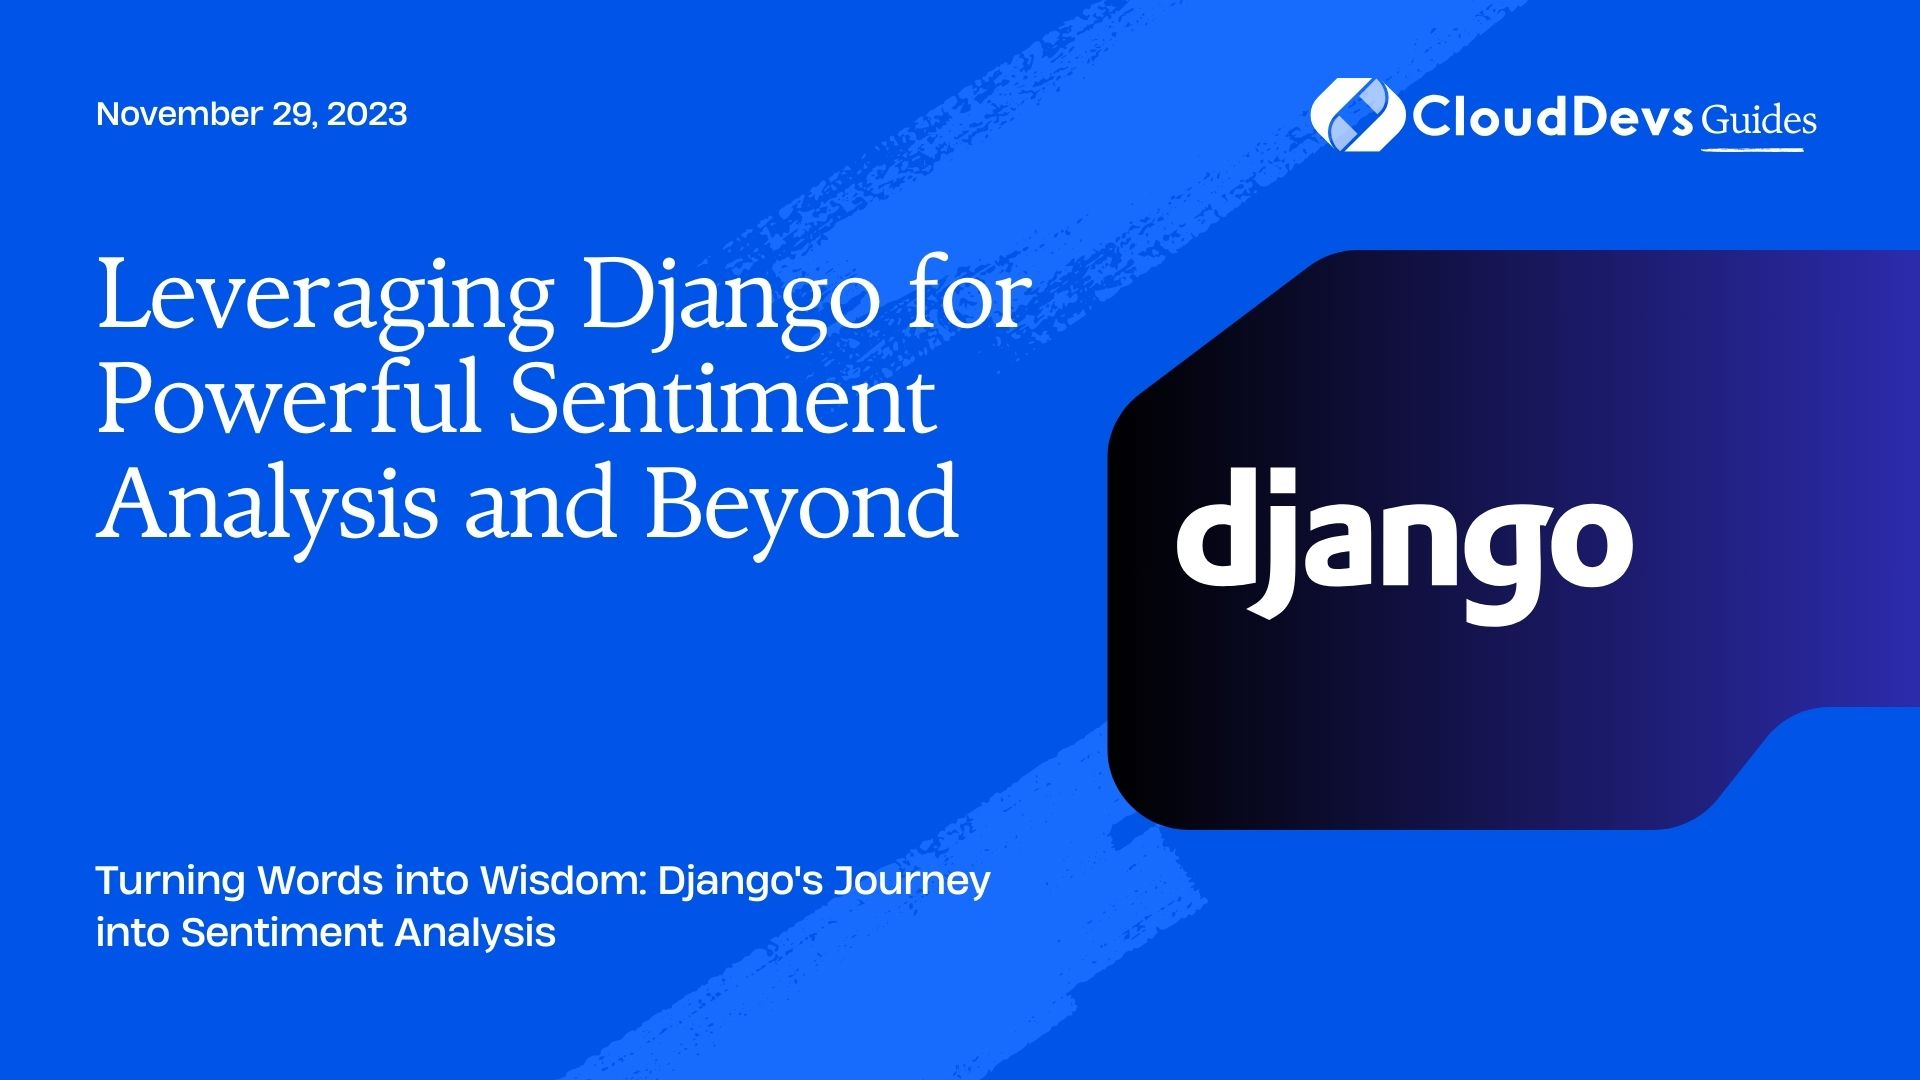 Leveraging Django for Powerful Sentiment Analysis and Beyond